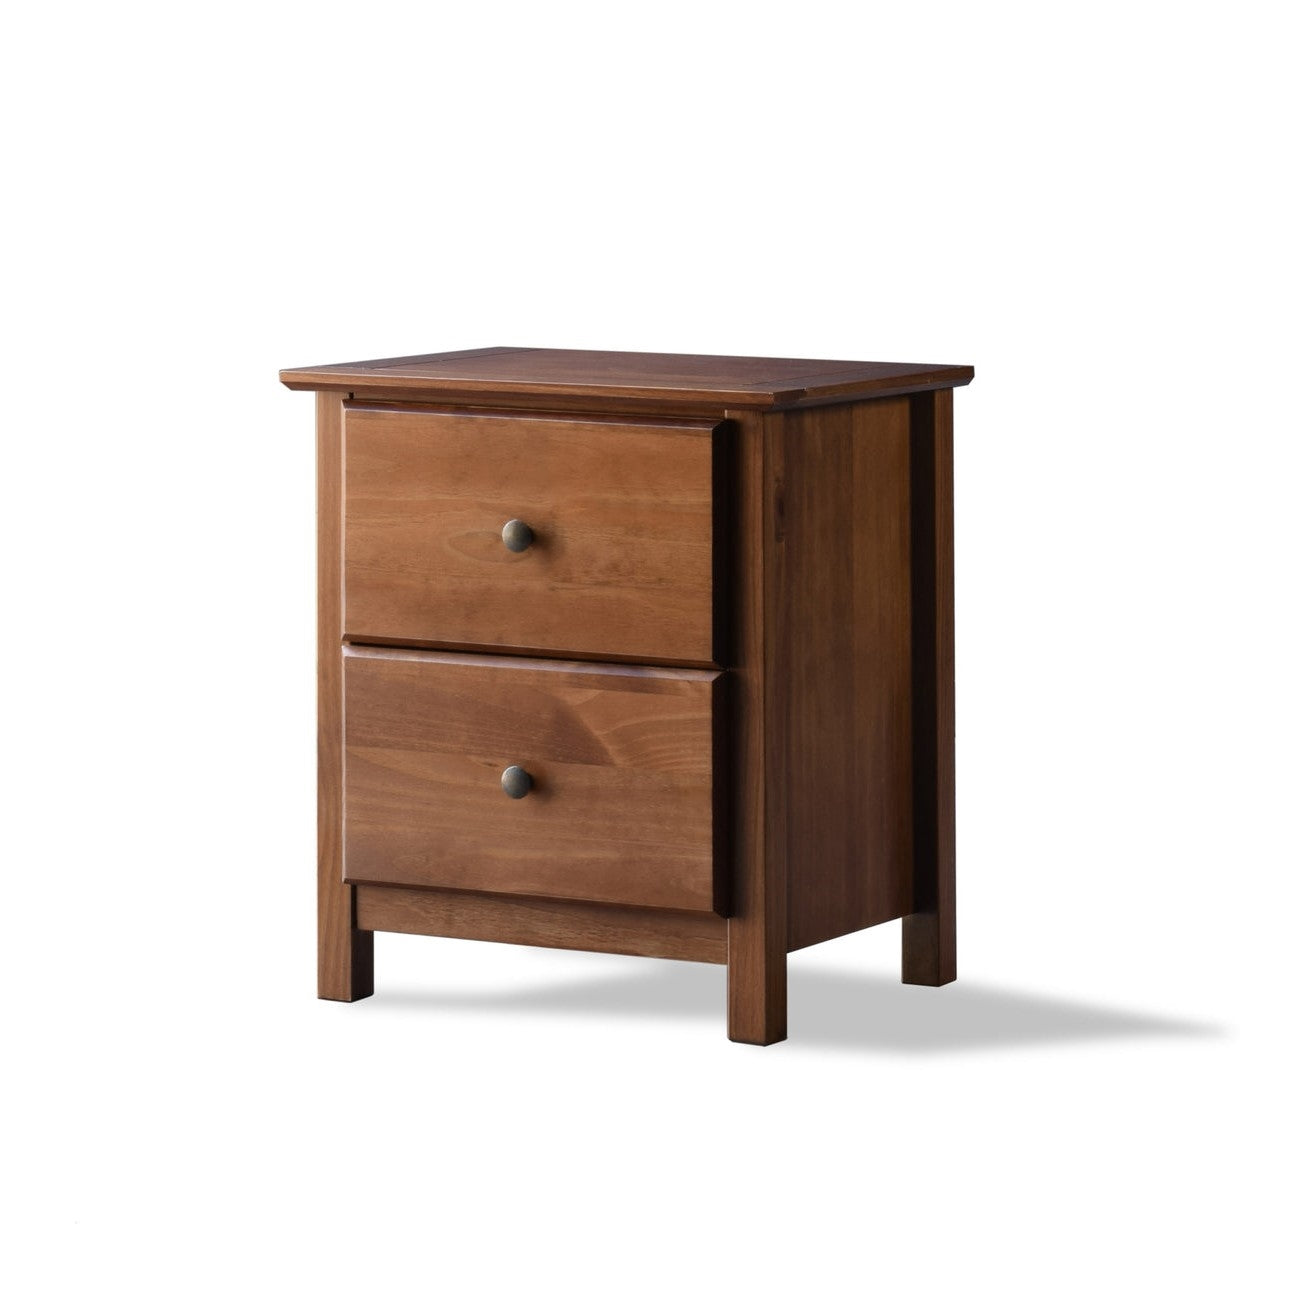 Farmhouse Solid Pine Wood 2 Drawer Nightstand in Walnut Finish